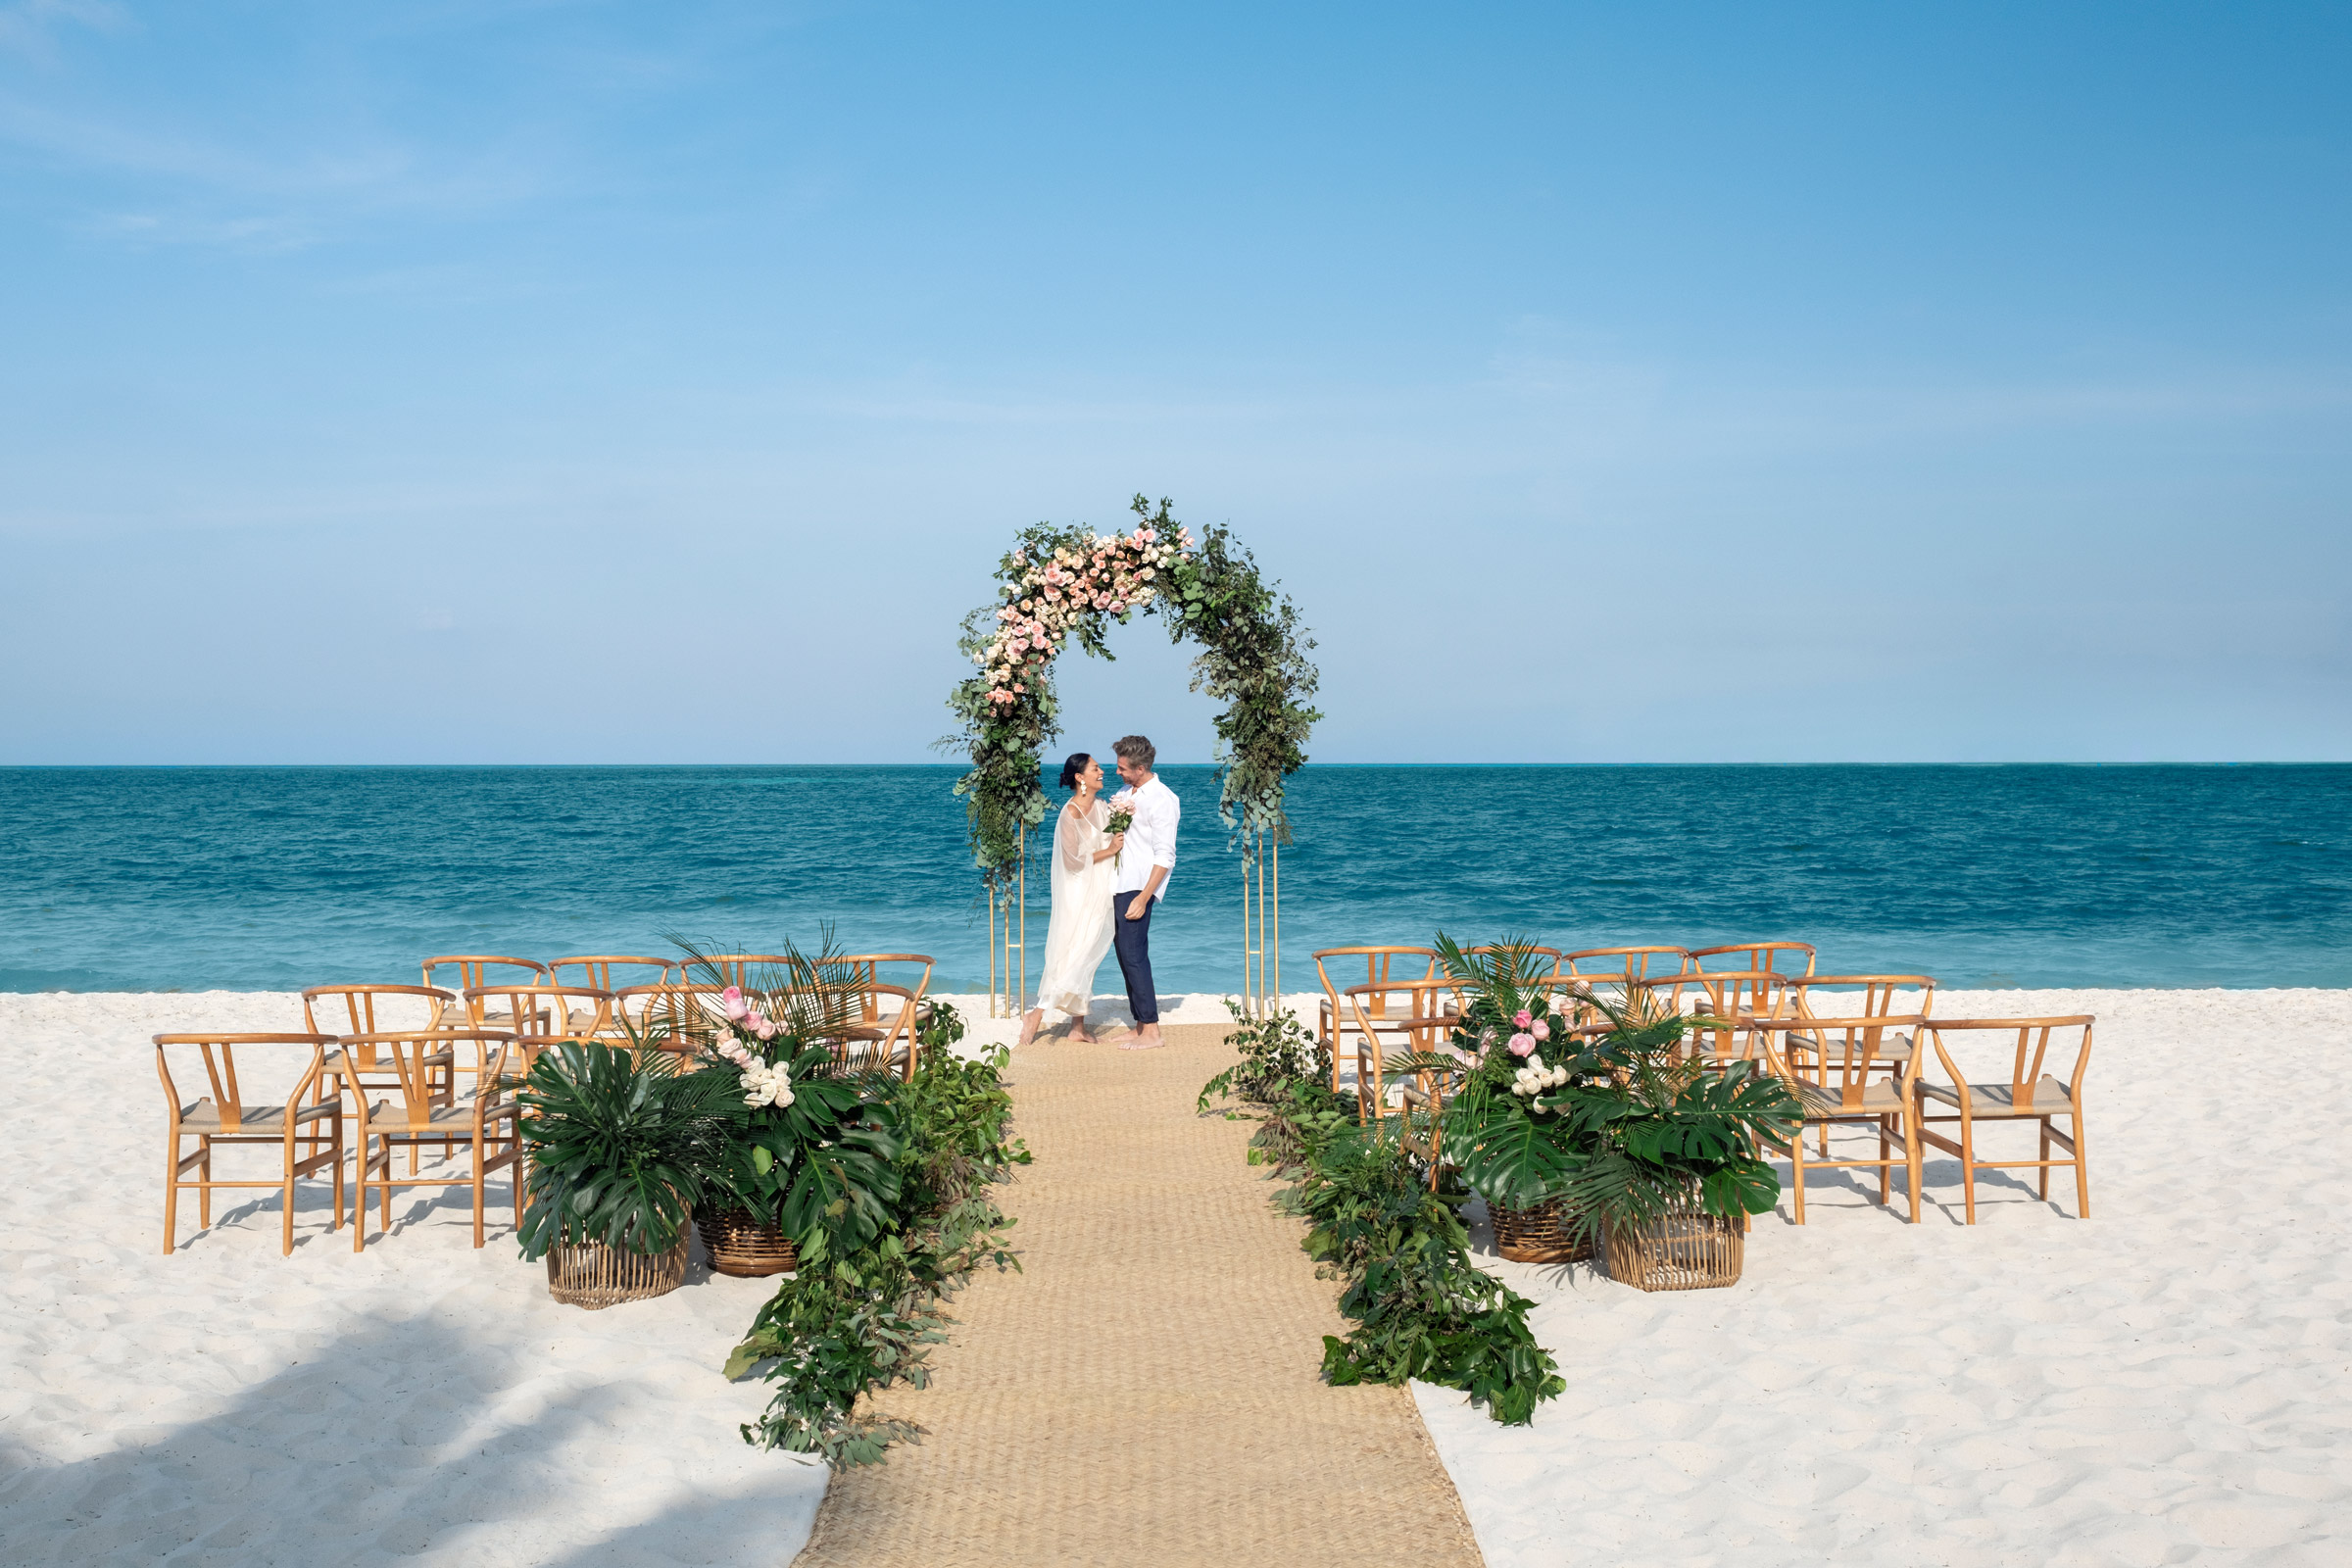 Plan the perfect day in a Cancun wedding resort